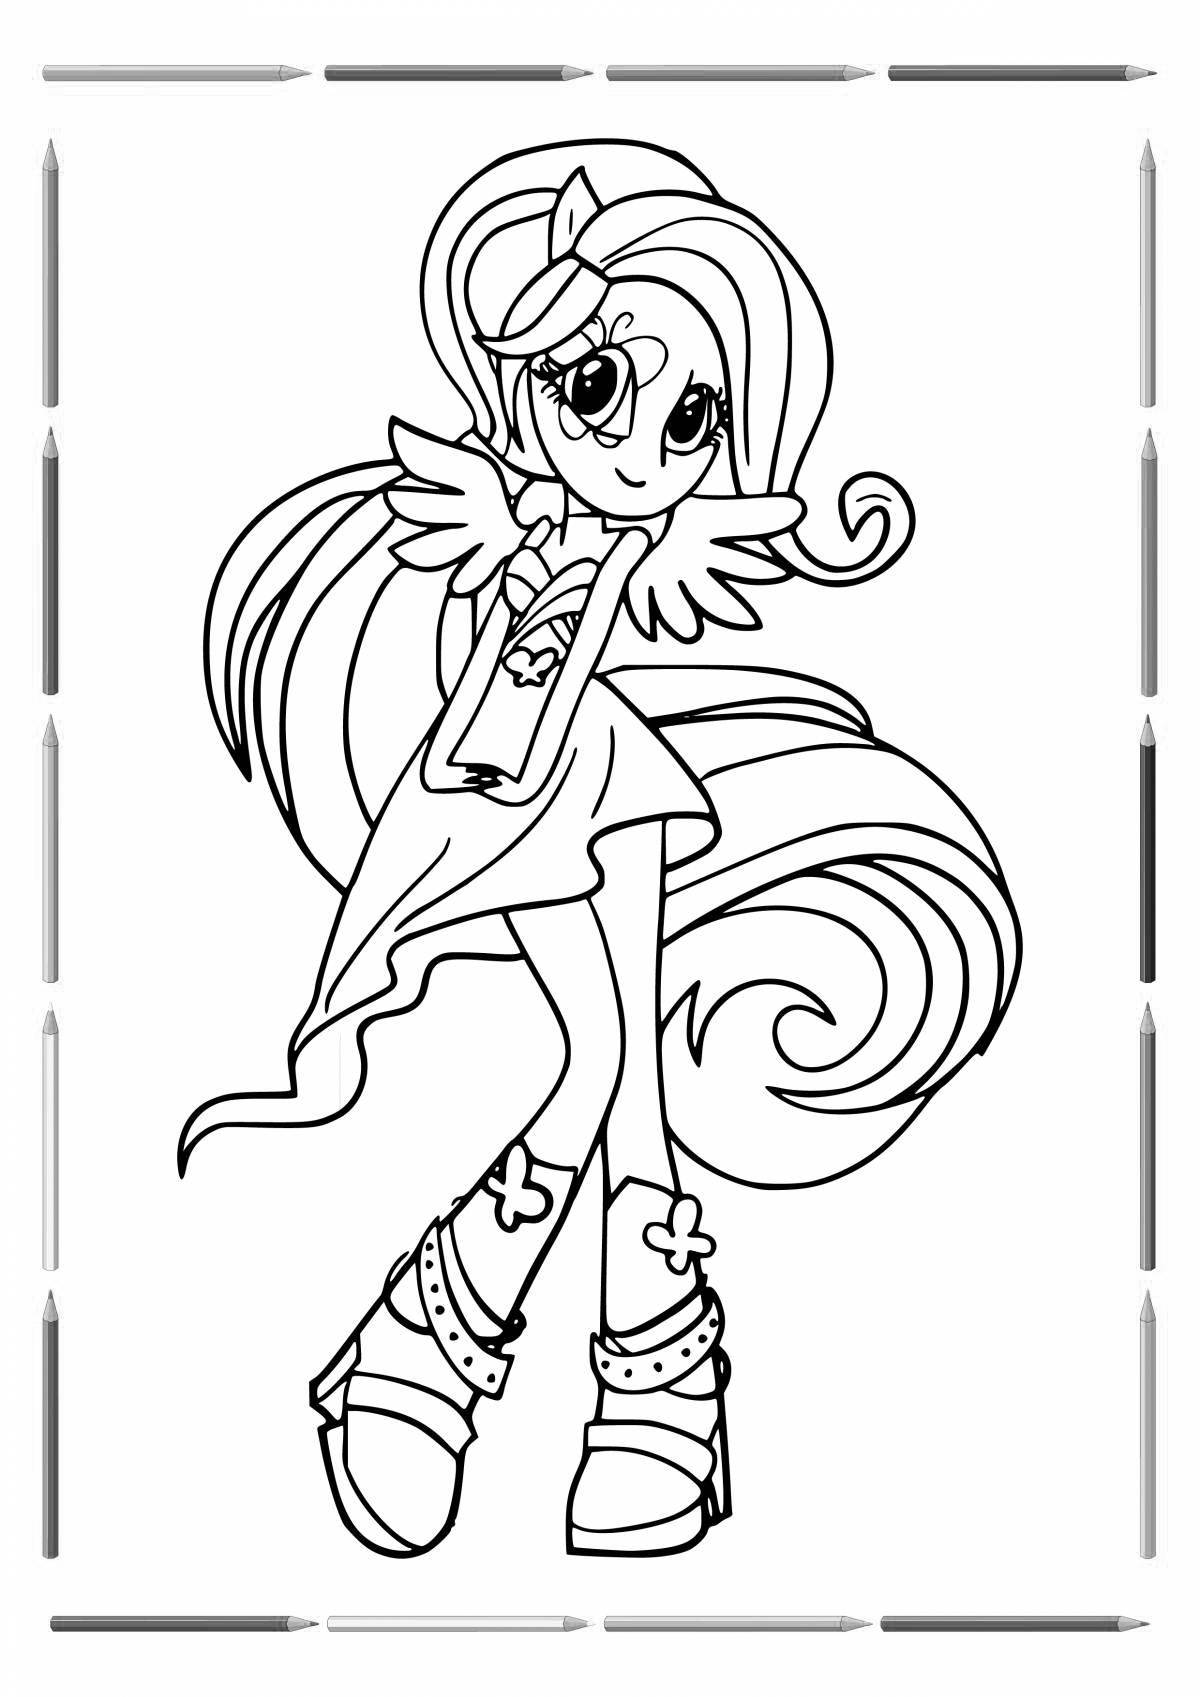 Coloring page exquisite pony doll